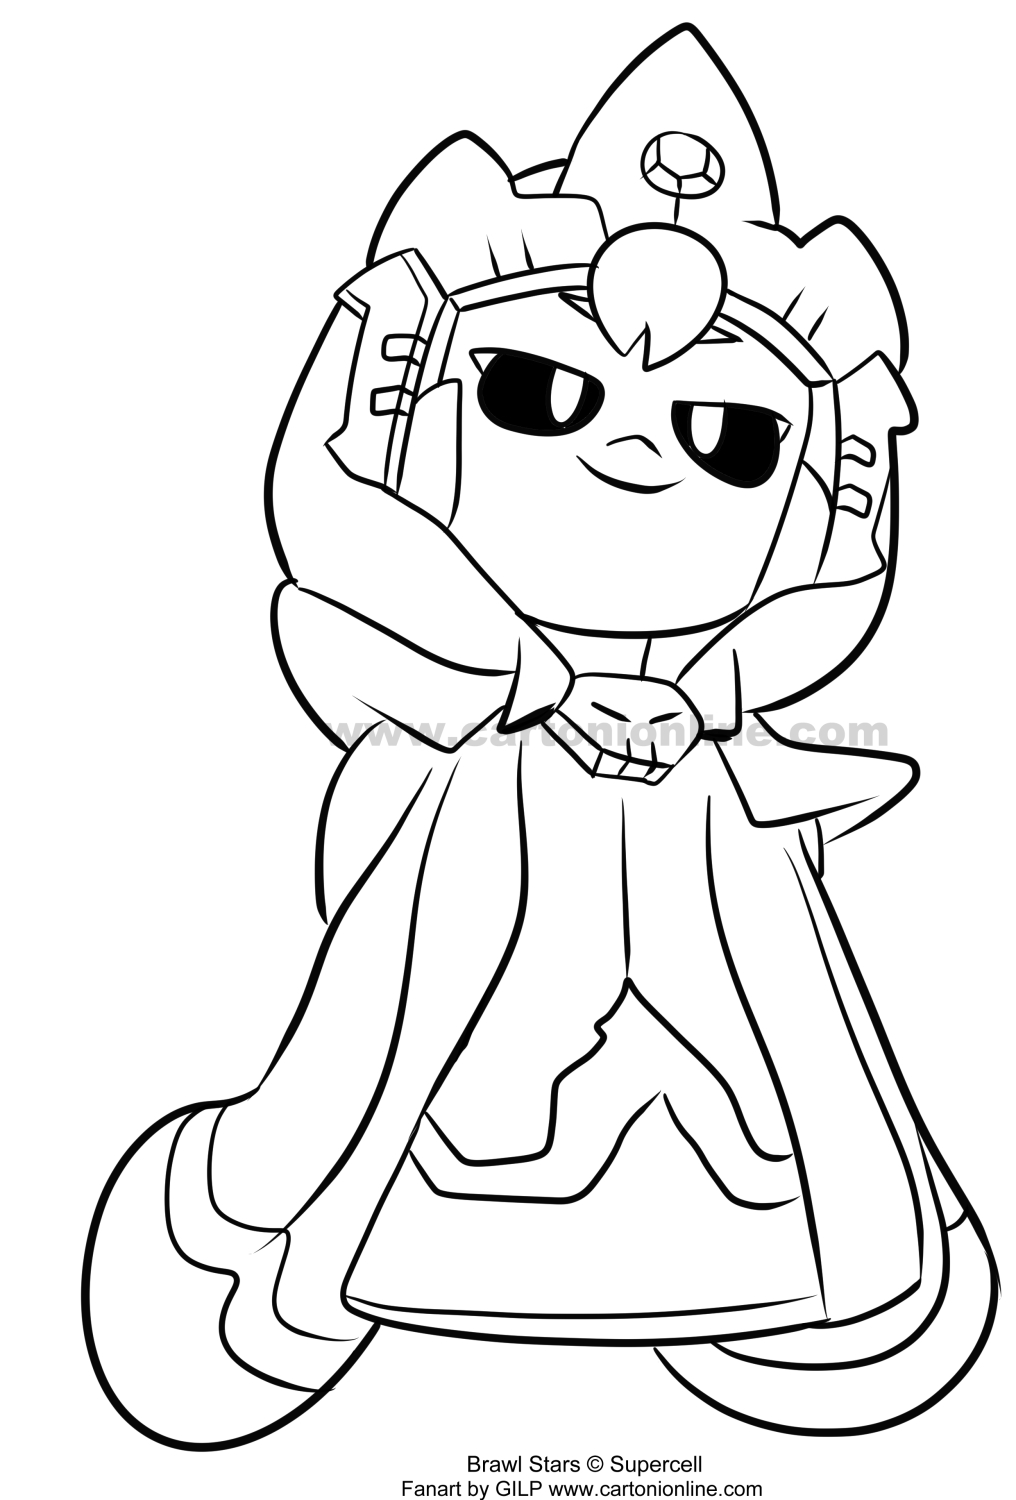 Bonnie 08 from Brawl Stars coloring page to print and coloring